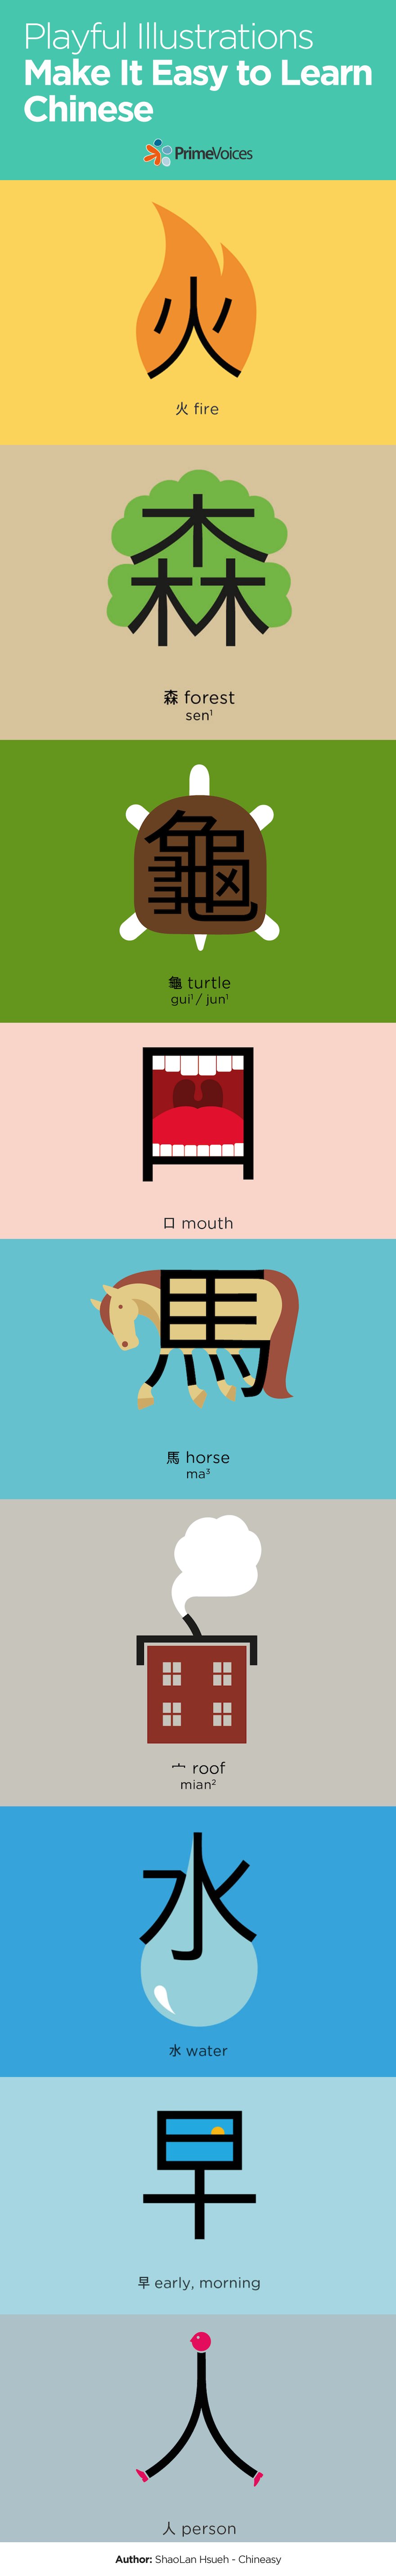 Playful Illustrations make it easy to learn Chinese